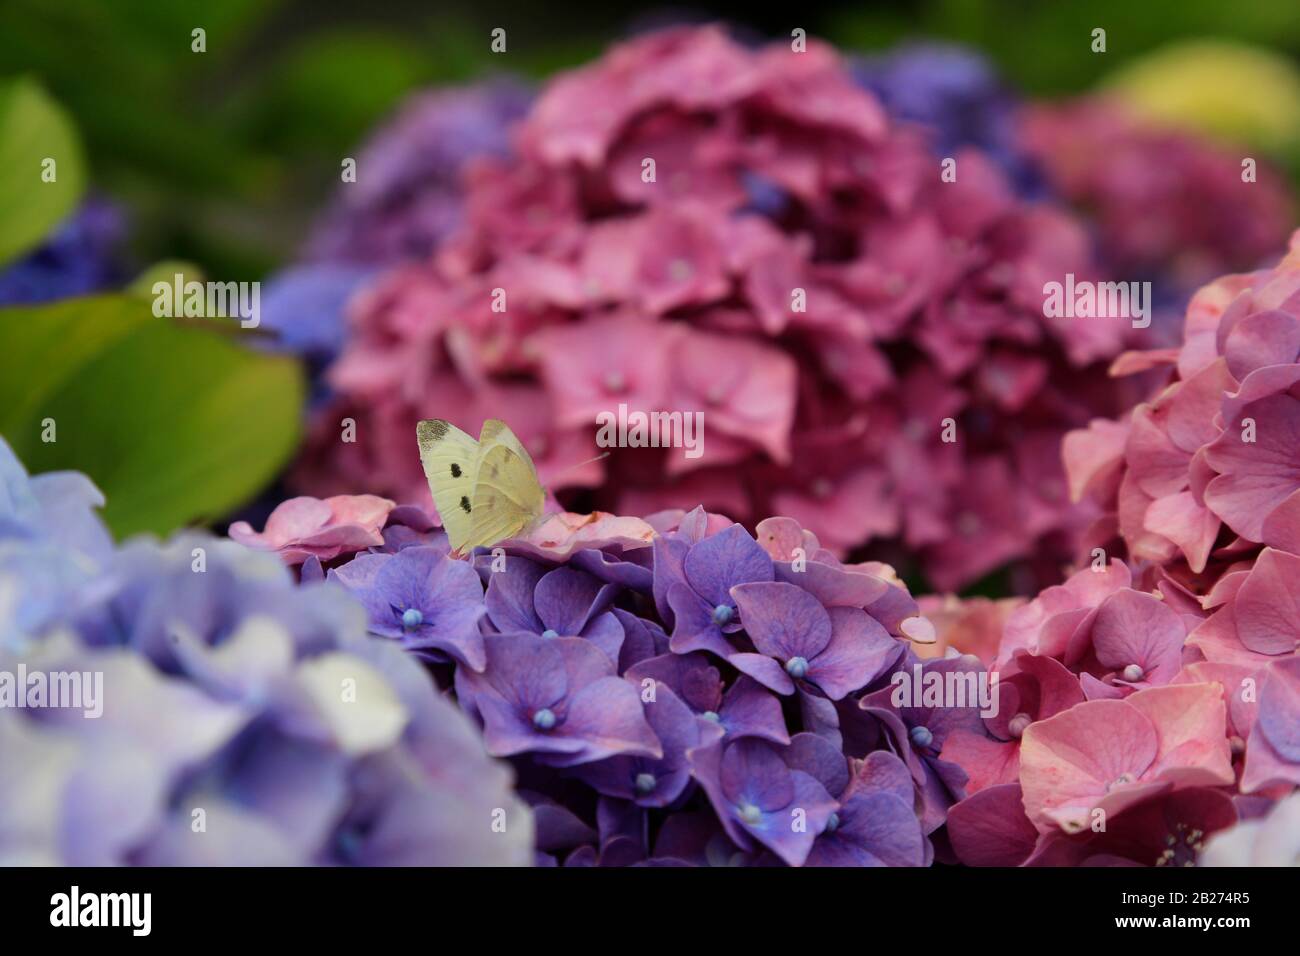 Cabbage White butterfly sitting on purple Hydrangea bloom. Stock Photo